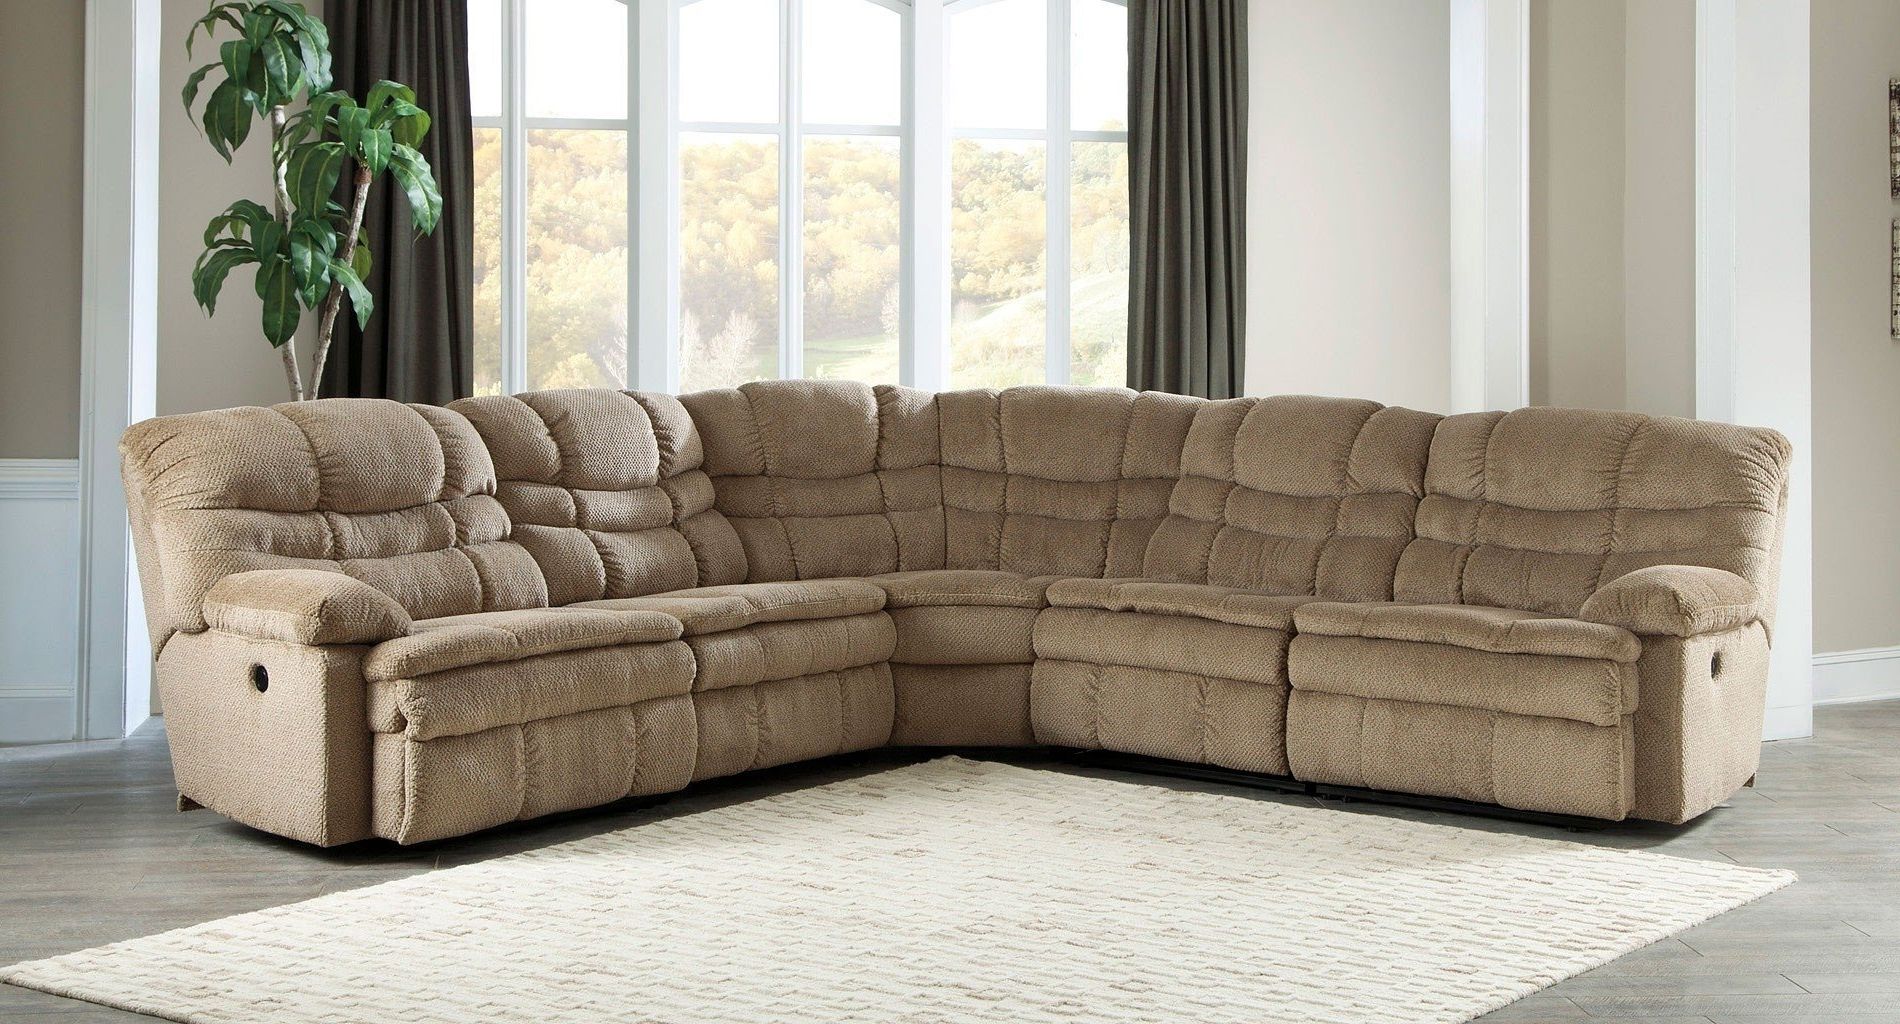 Zavion Caramel Modular Reclining Sectional – Sectionals – Living Throughout Most Popular New Orleans Sectional Sofas (View 13 of 20)